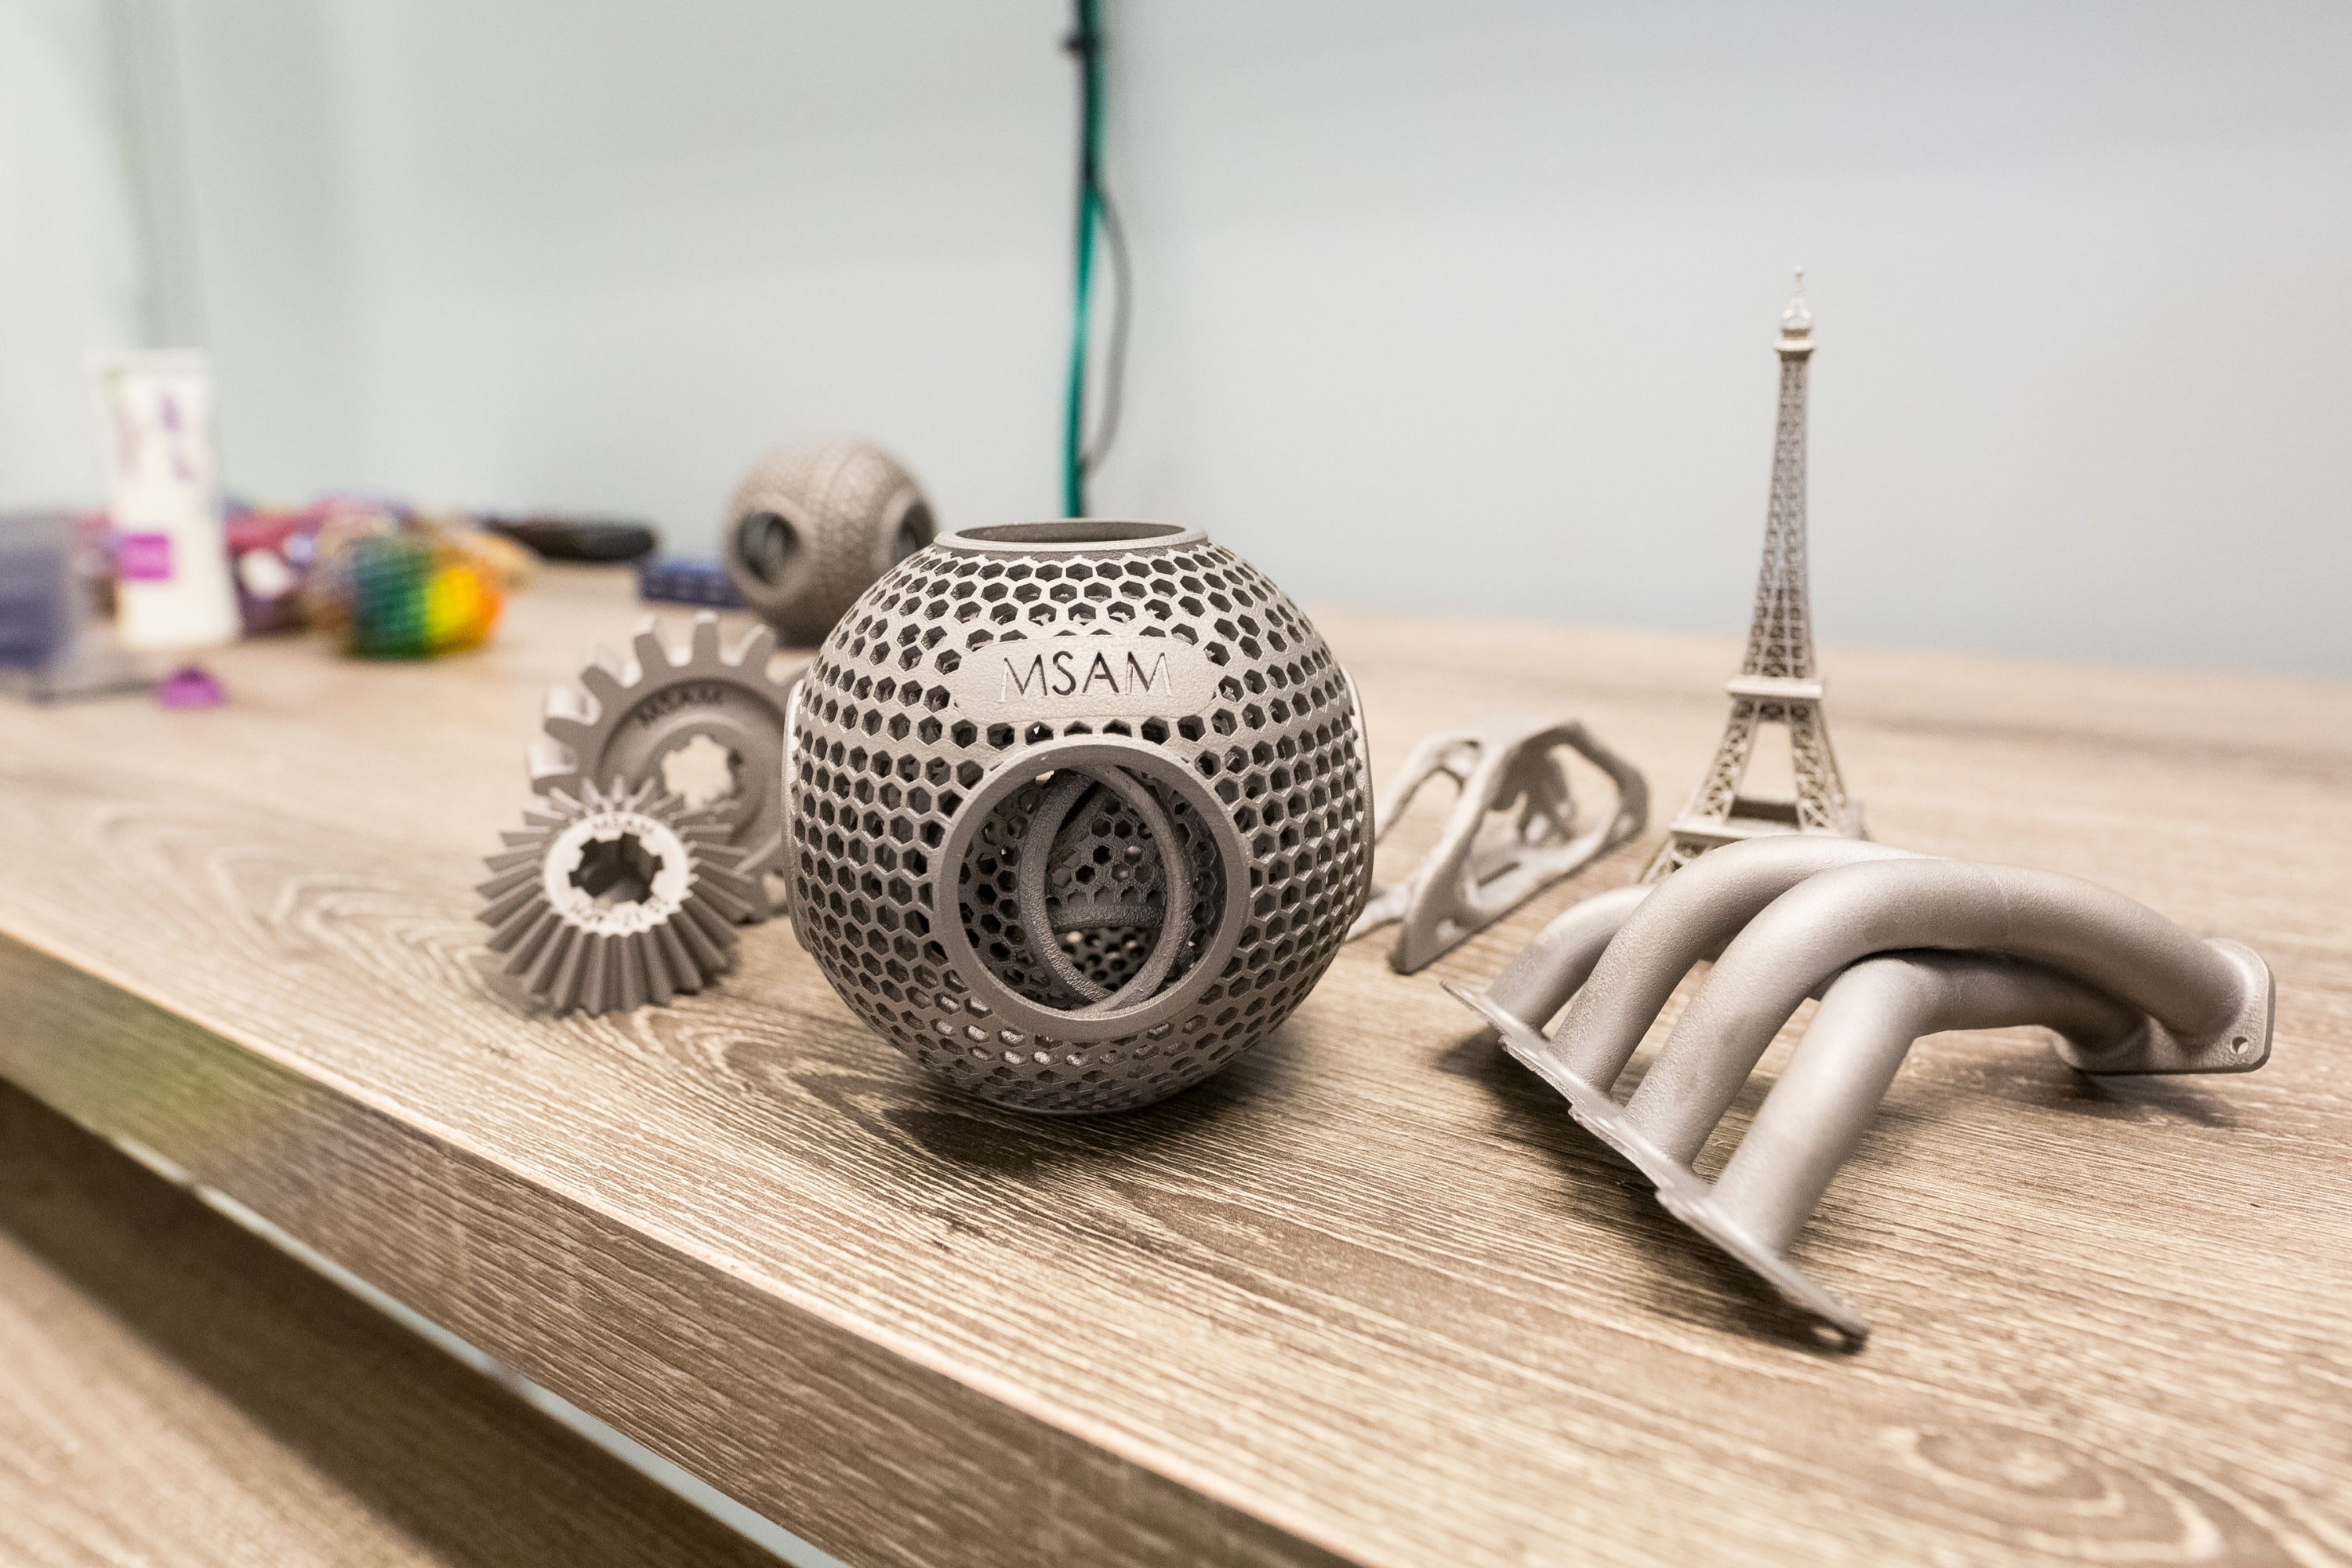 Metal objects that were 3D printed at the Multi-Scale Additive Manufacturing (MSAM) Laboratory at the University of Waterloo.